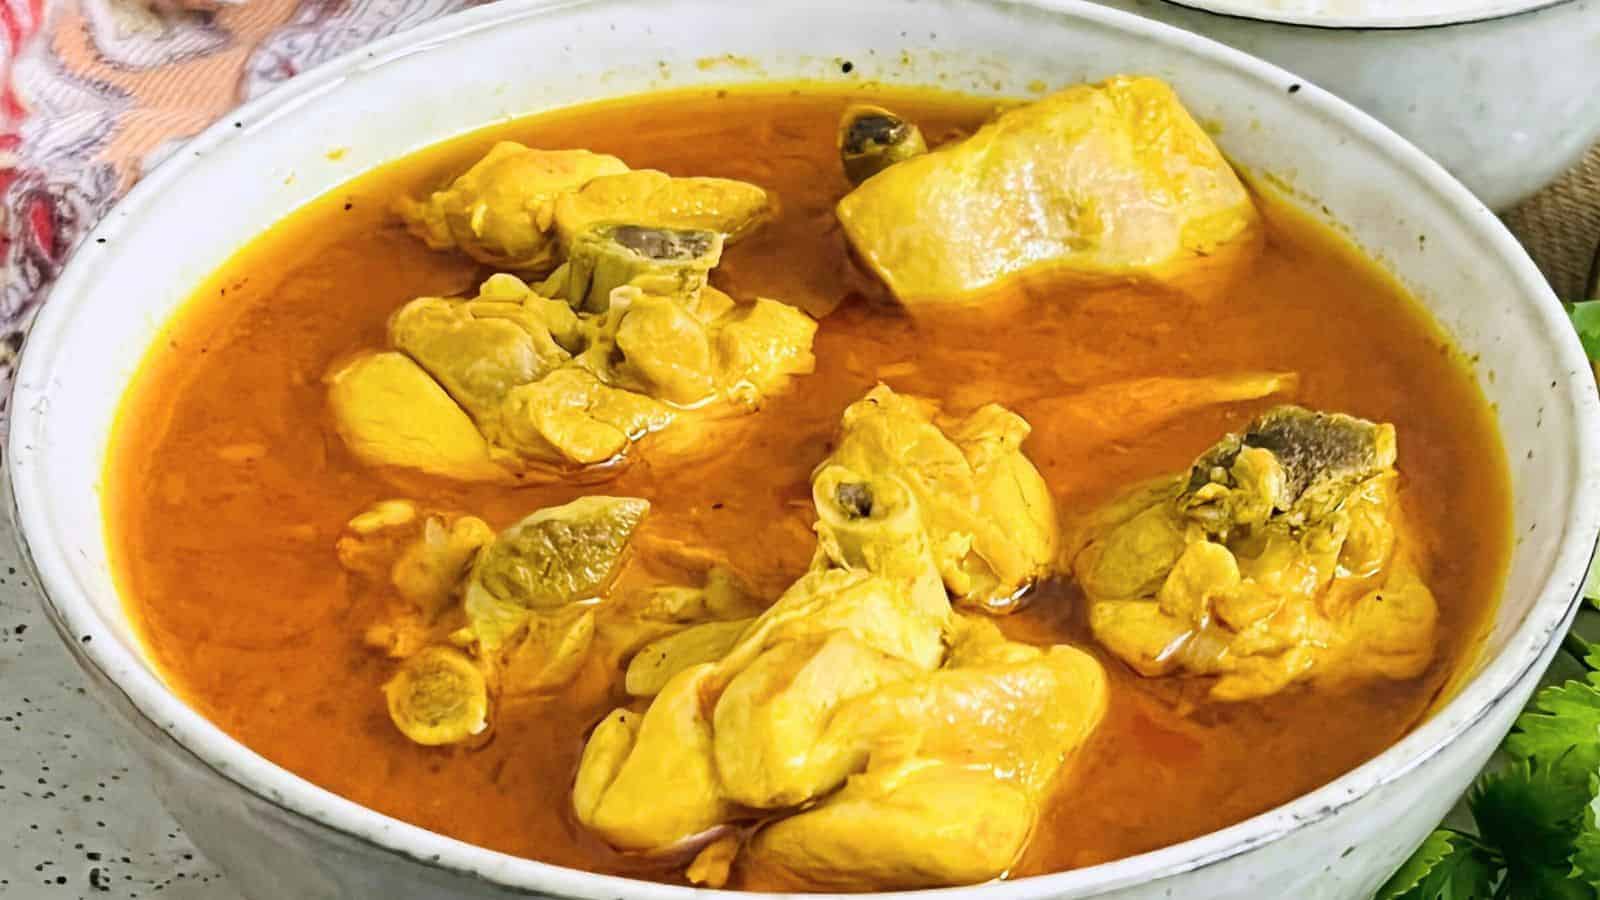 A bowl of Chicken Curry Home Style with pieces of meat and visible spices in a rich, orange sauce.